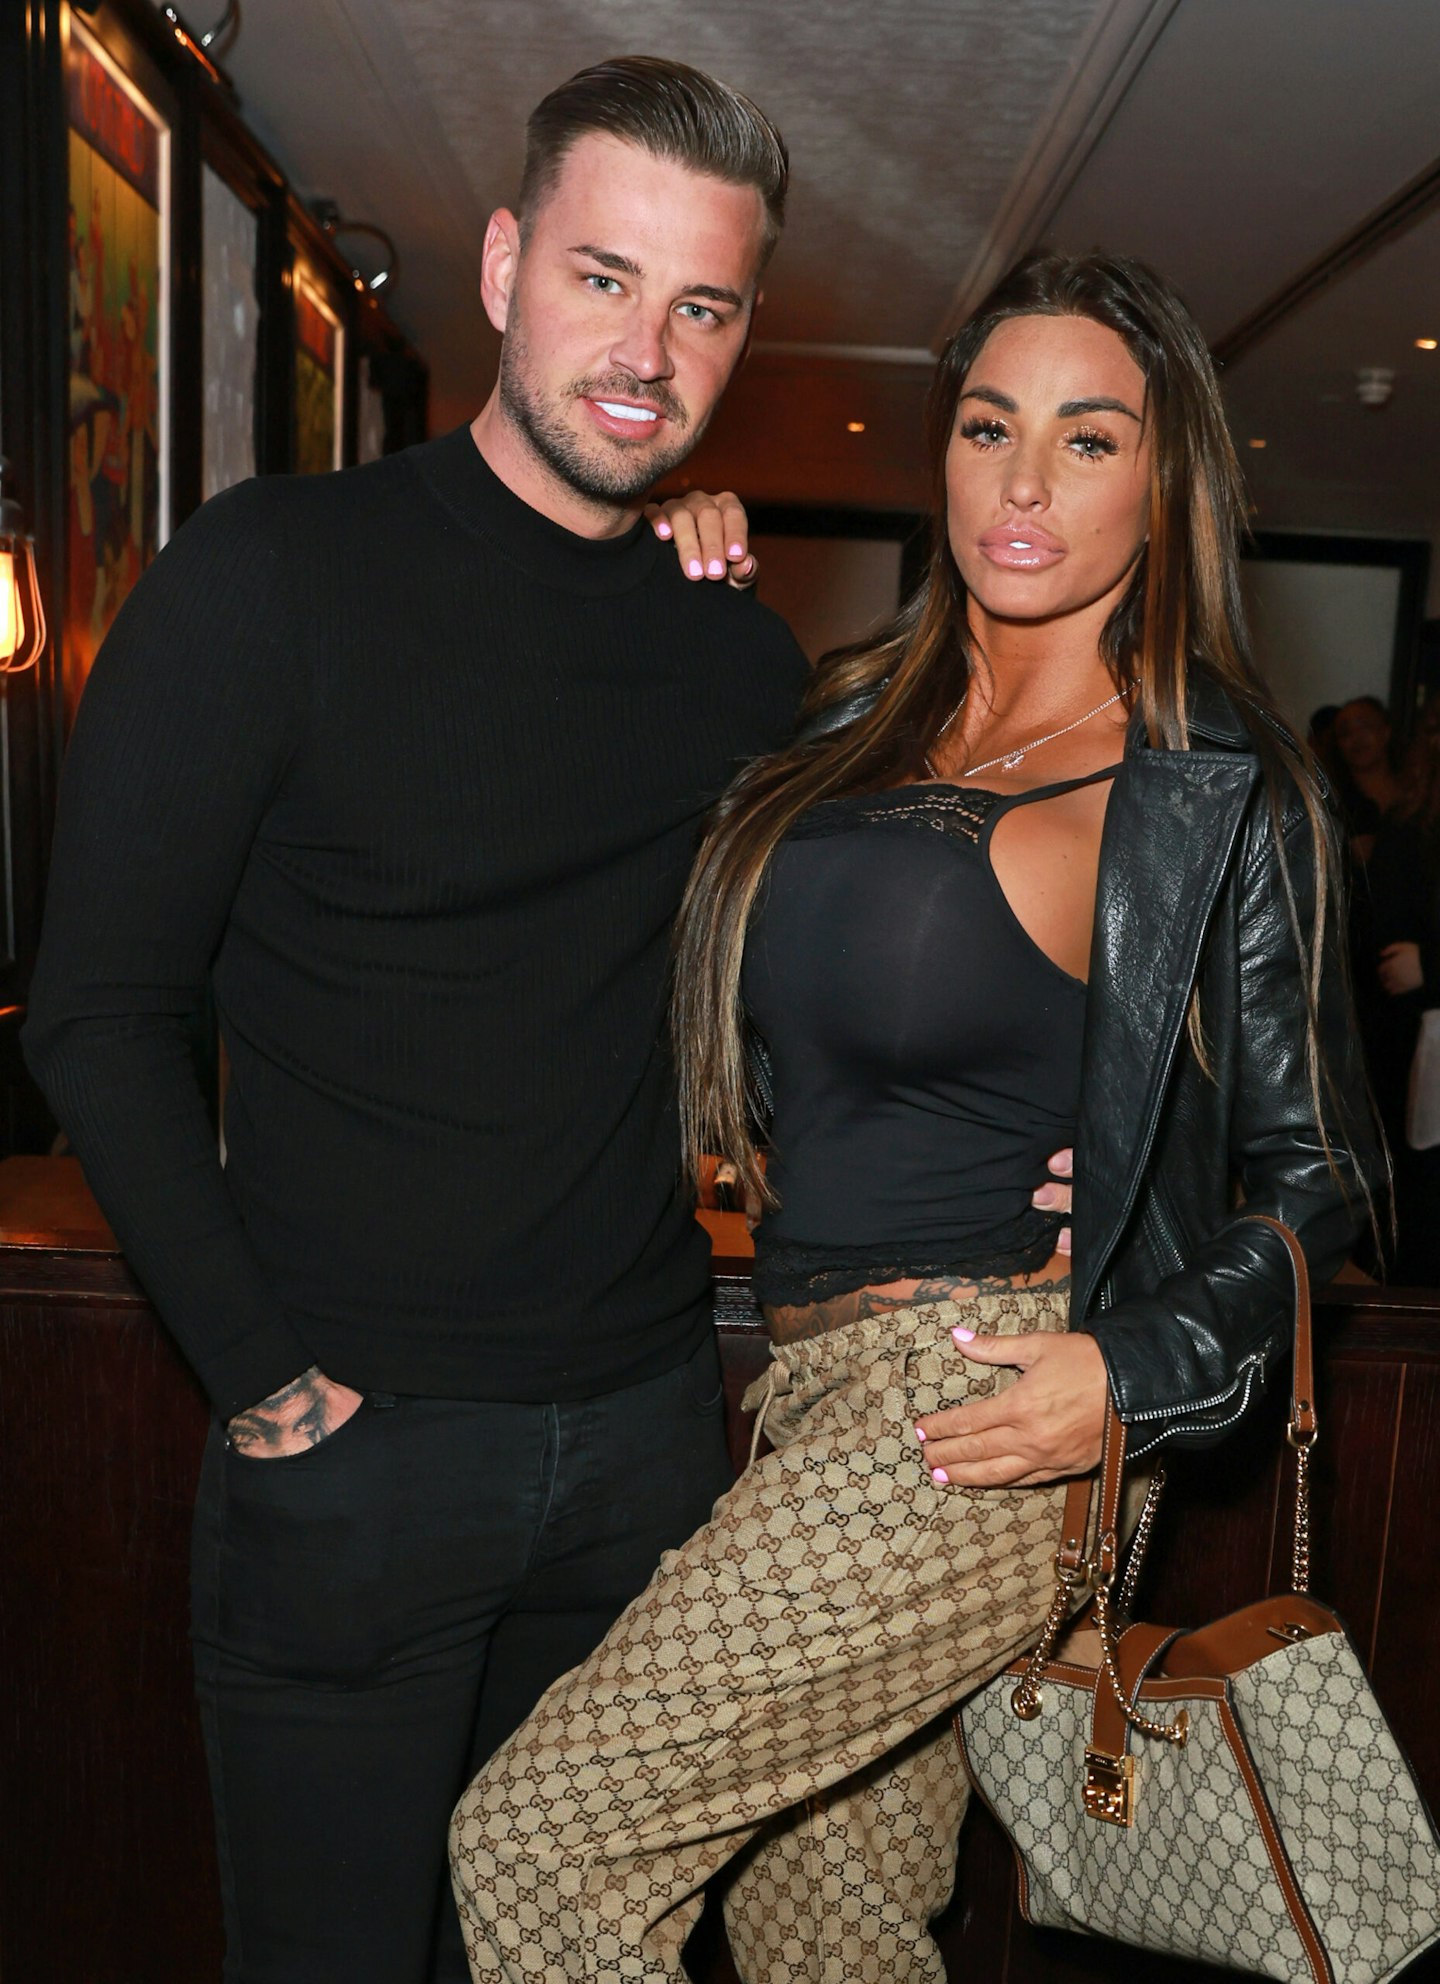 katie price and carl woods together